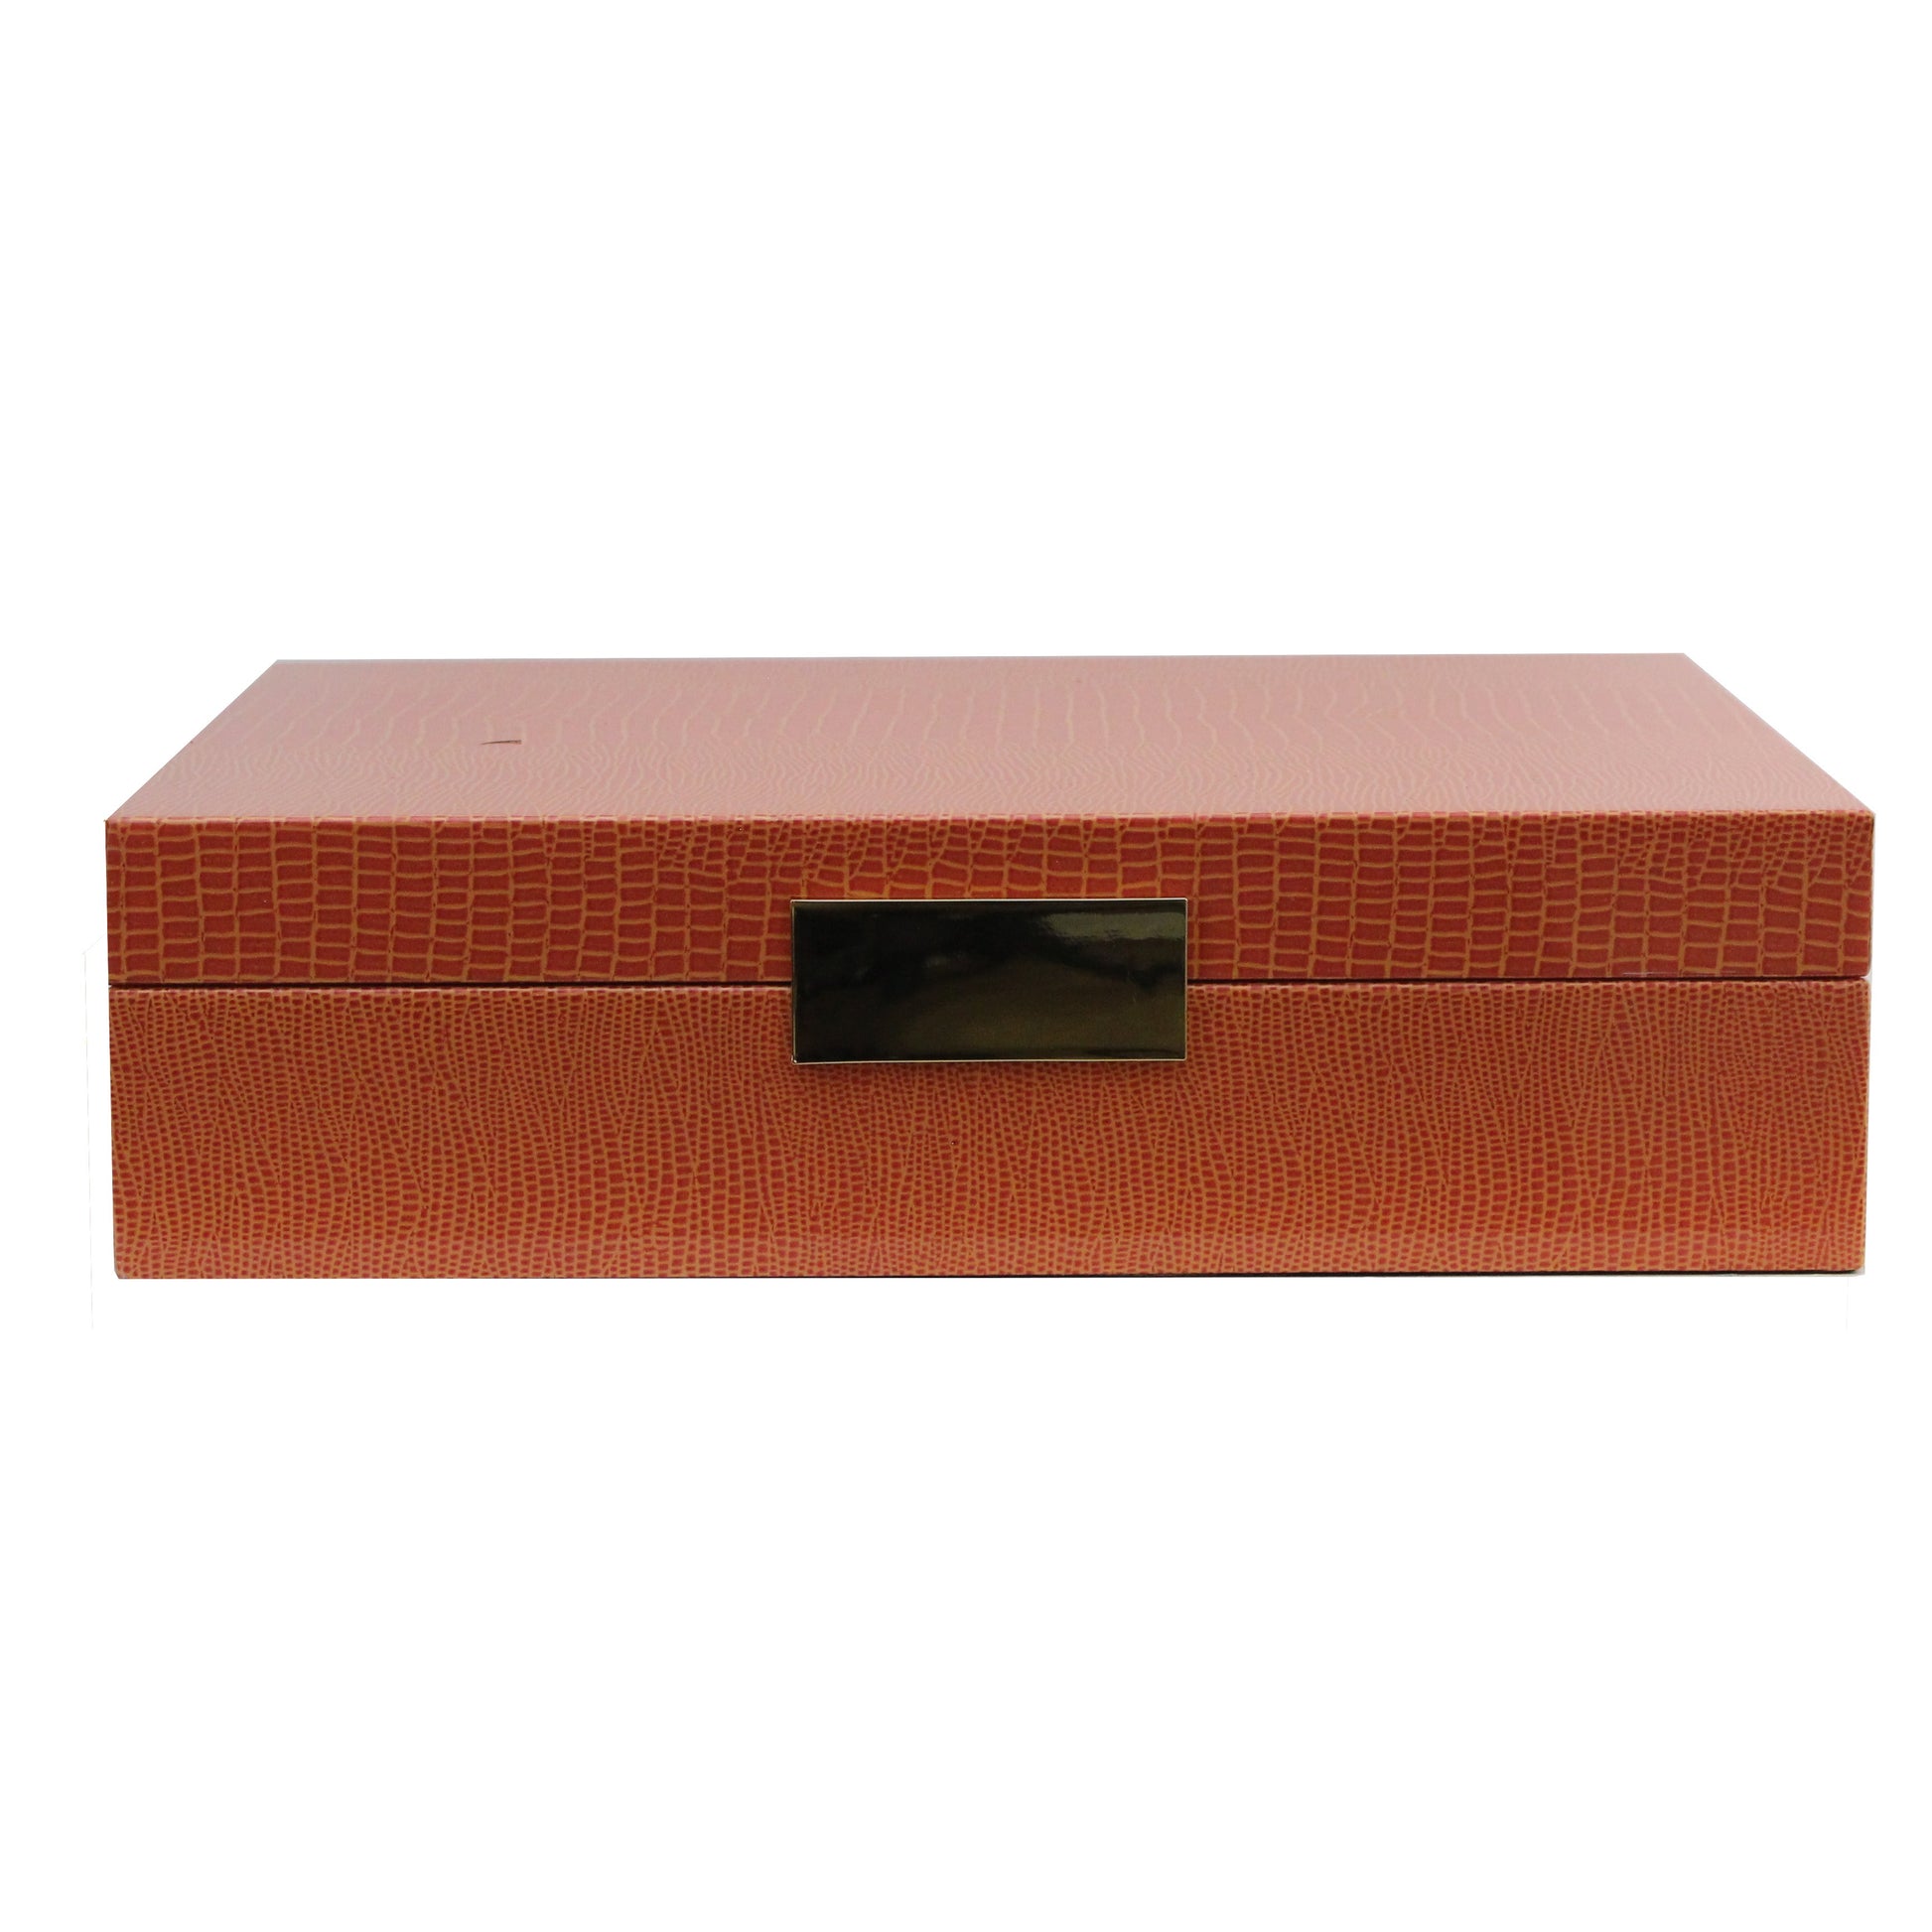 Large orange storage box with gold plated clasp